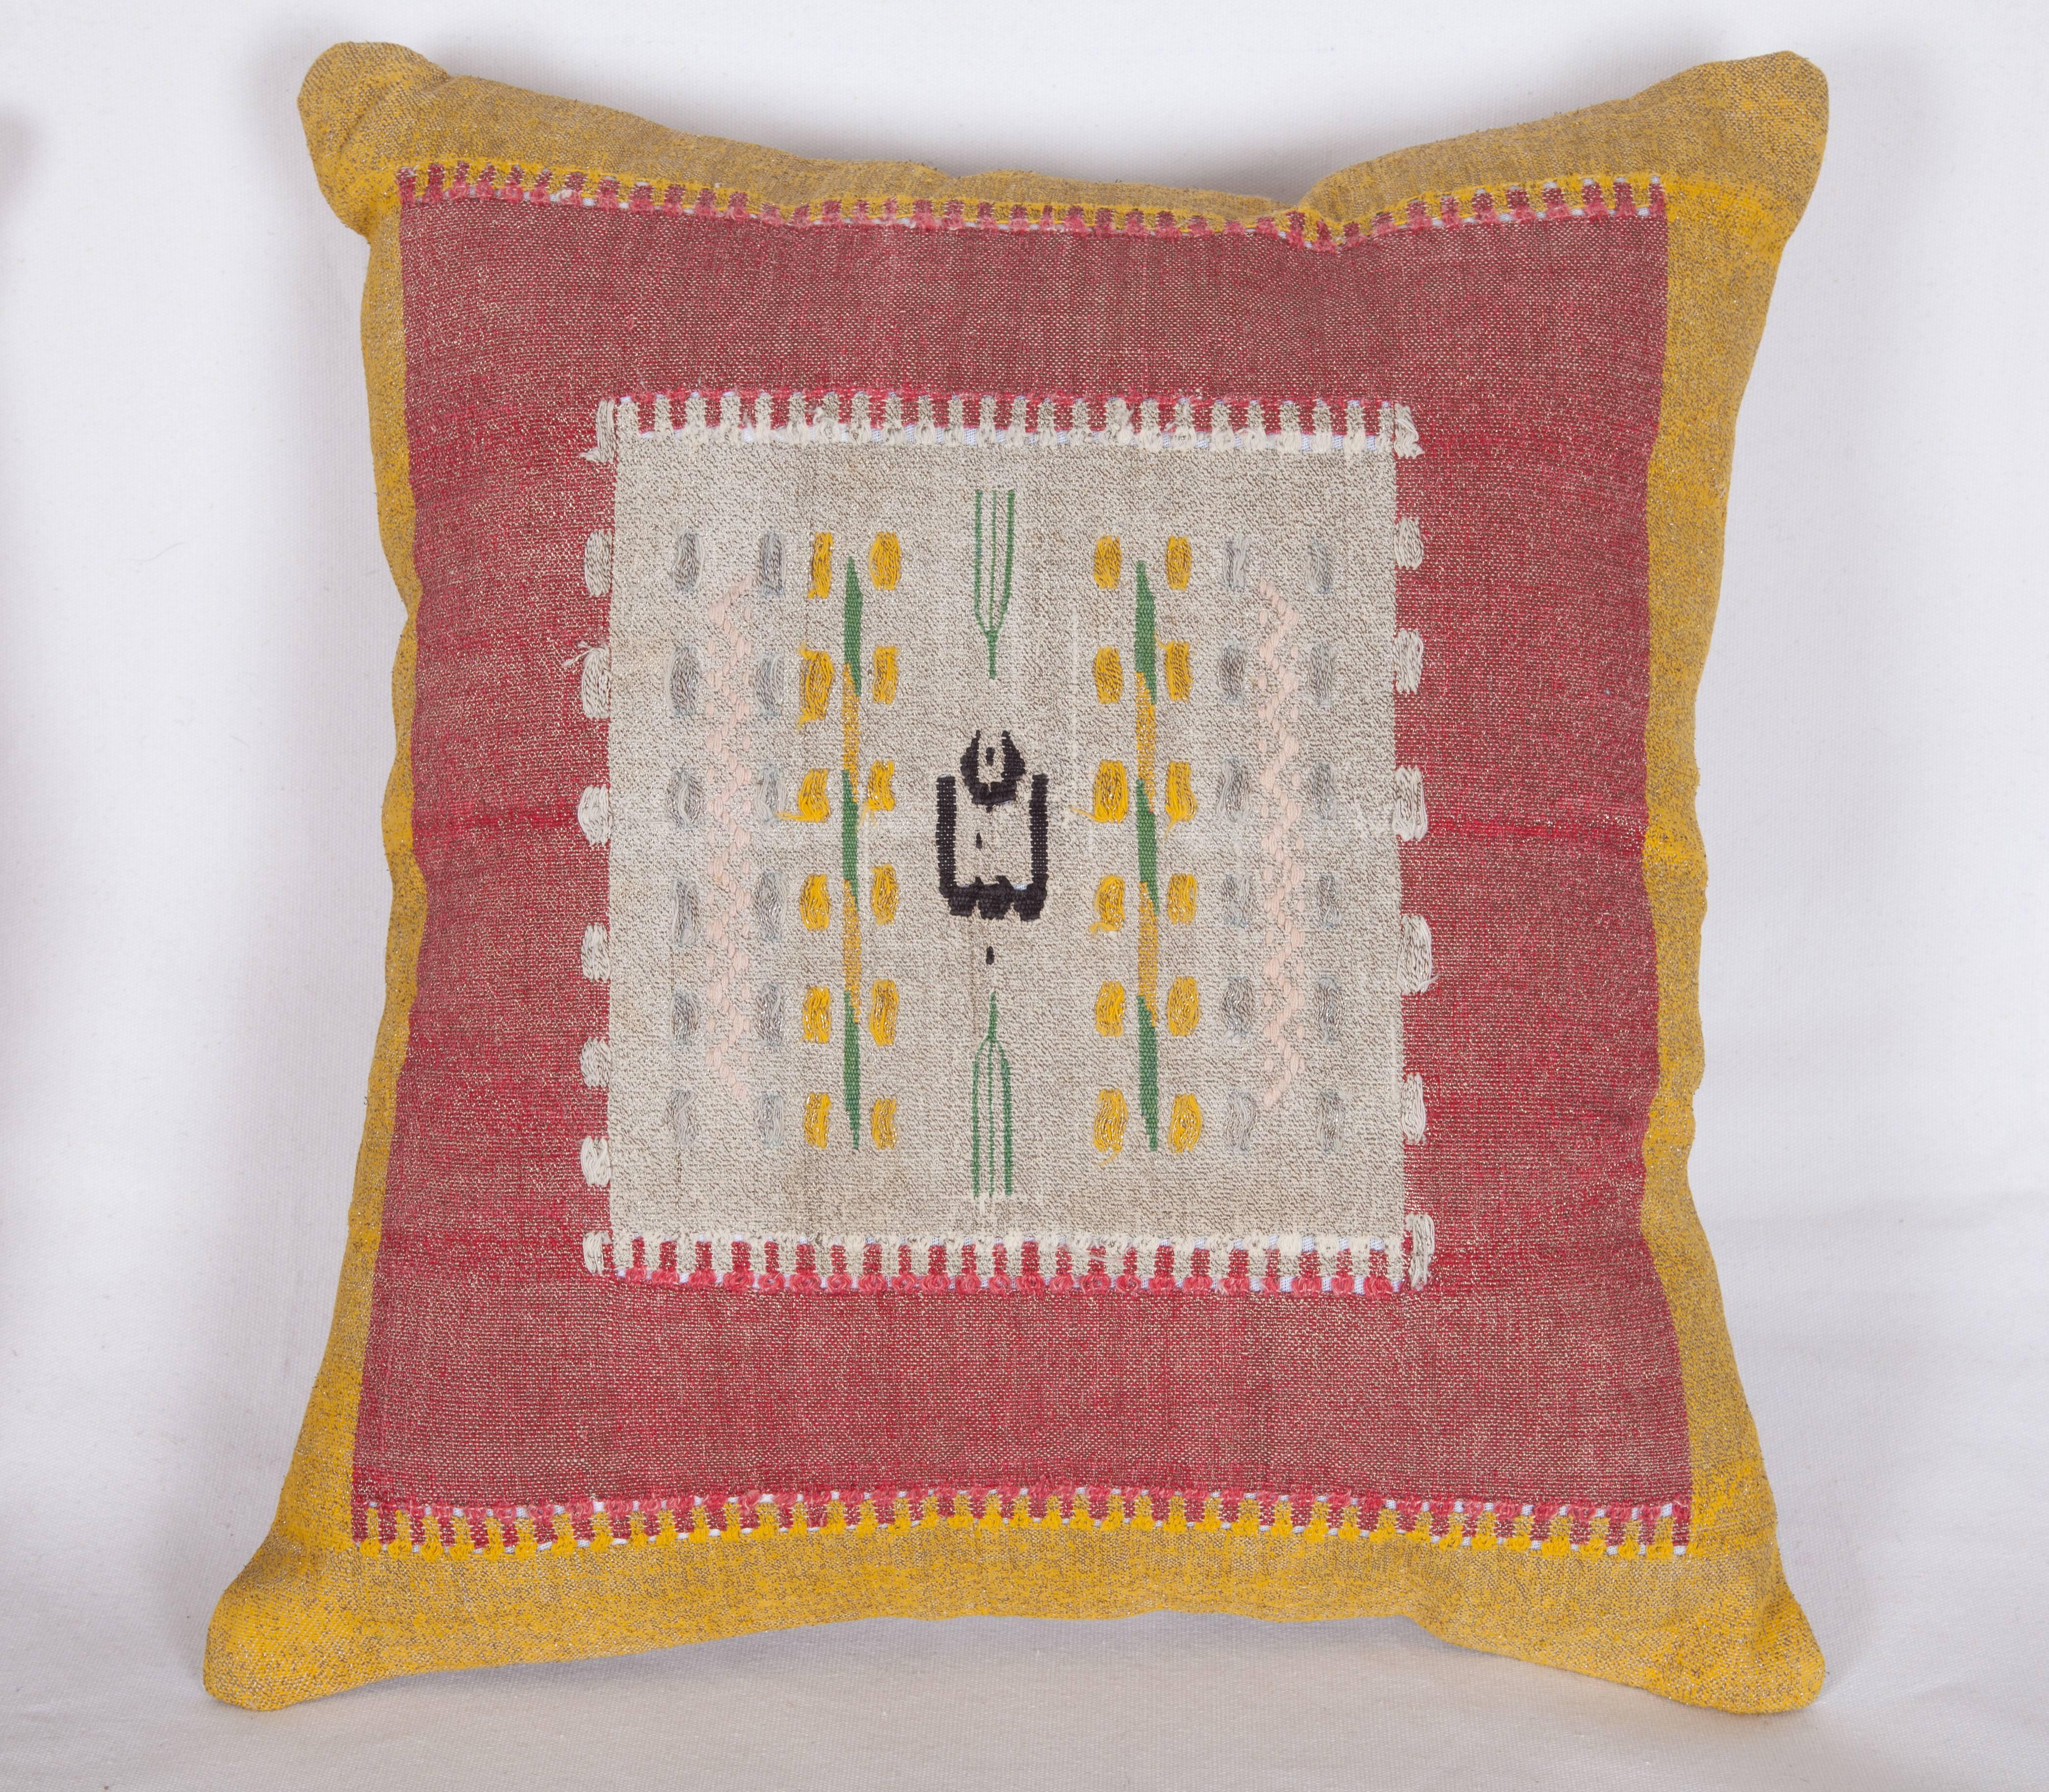 Islamic Antique Pillows Made Out of a Middle Eastern Pillow Tops